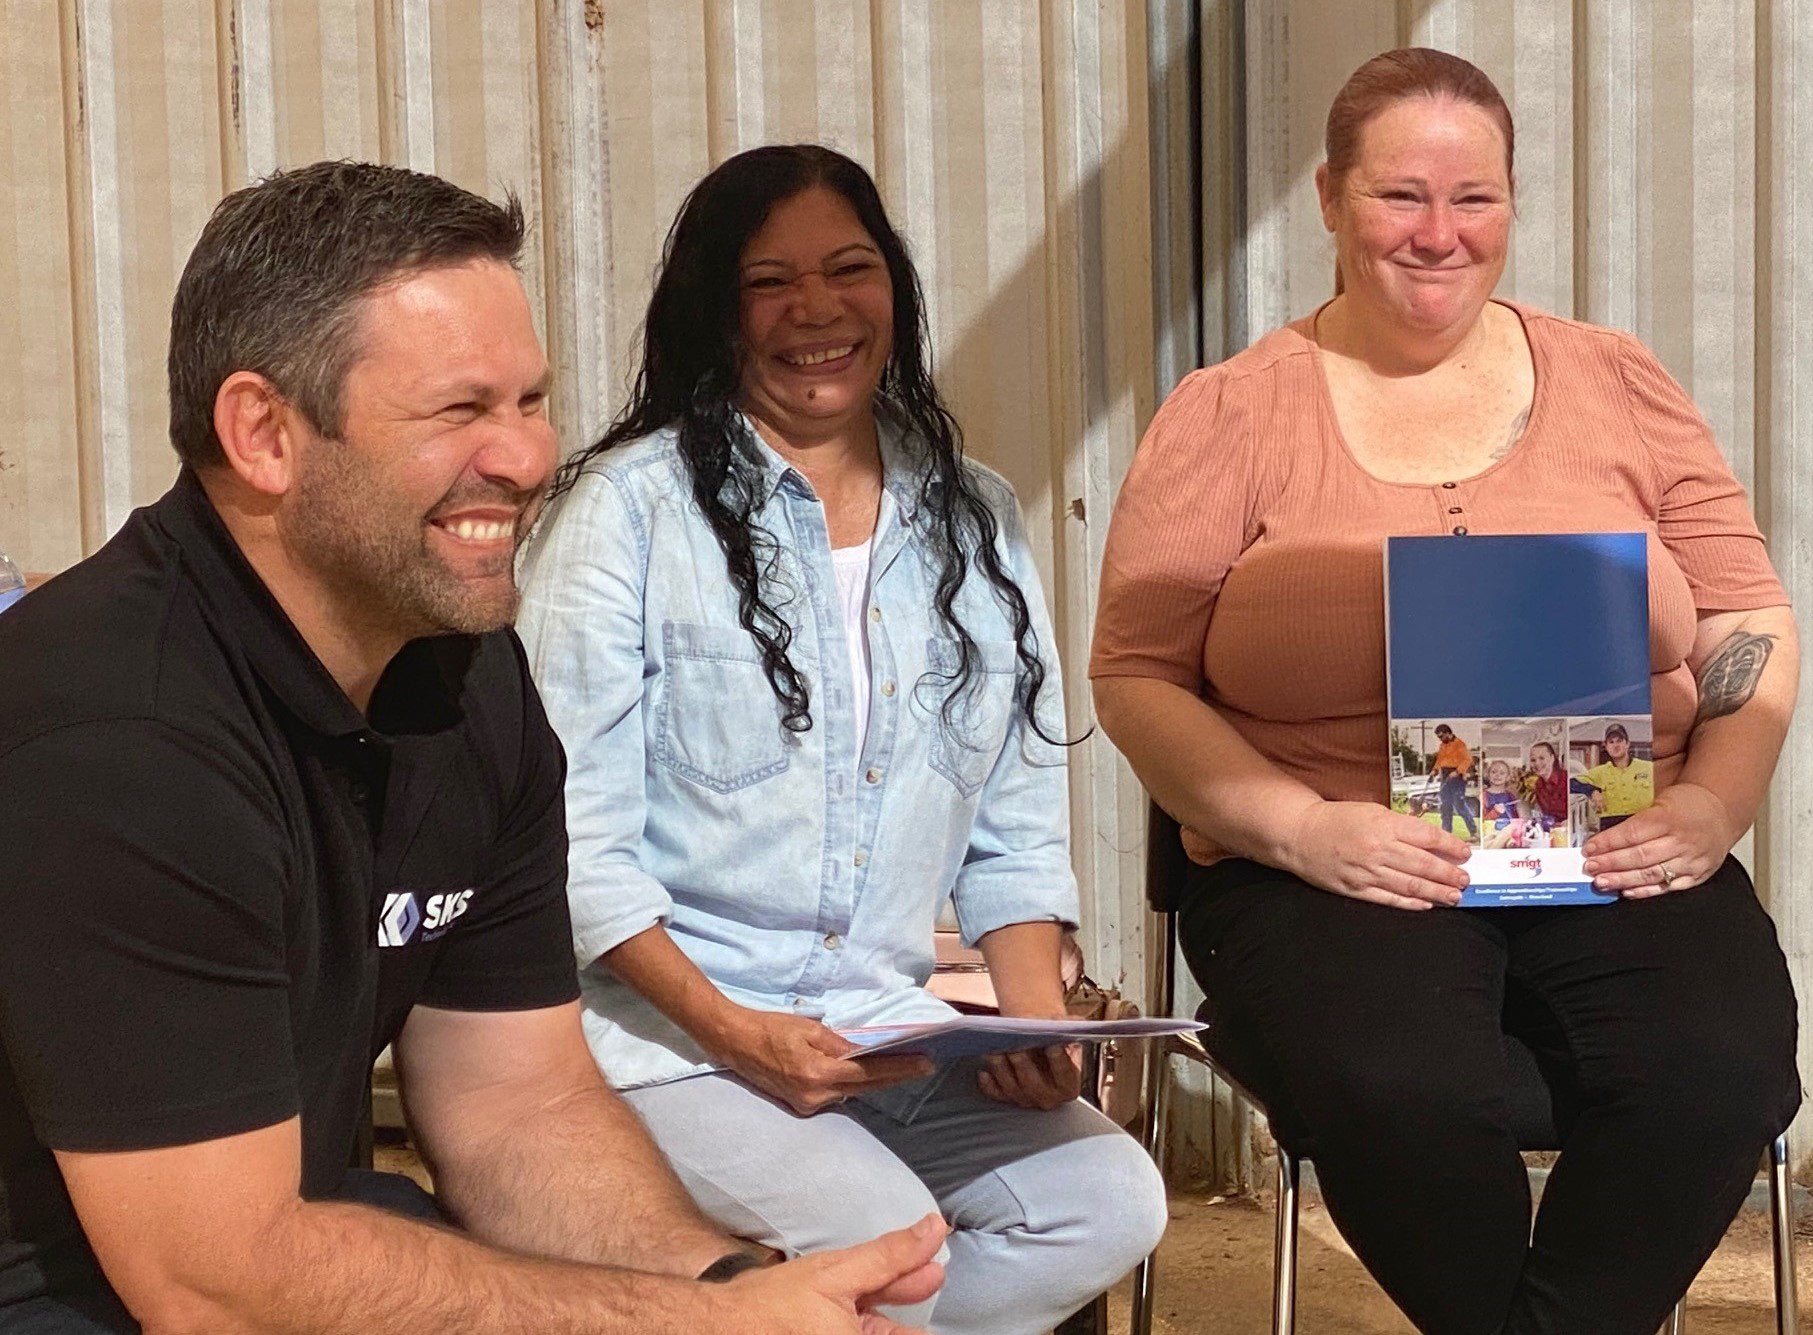 Chris Johnson shares personal experiences with participants Tracey and Regina at the Ready, Set, Go! program in Mildura.